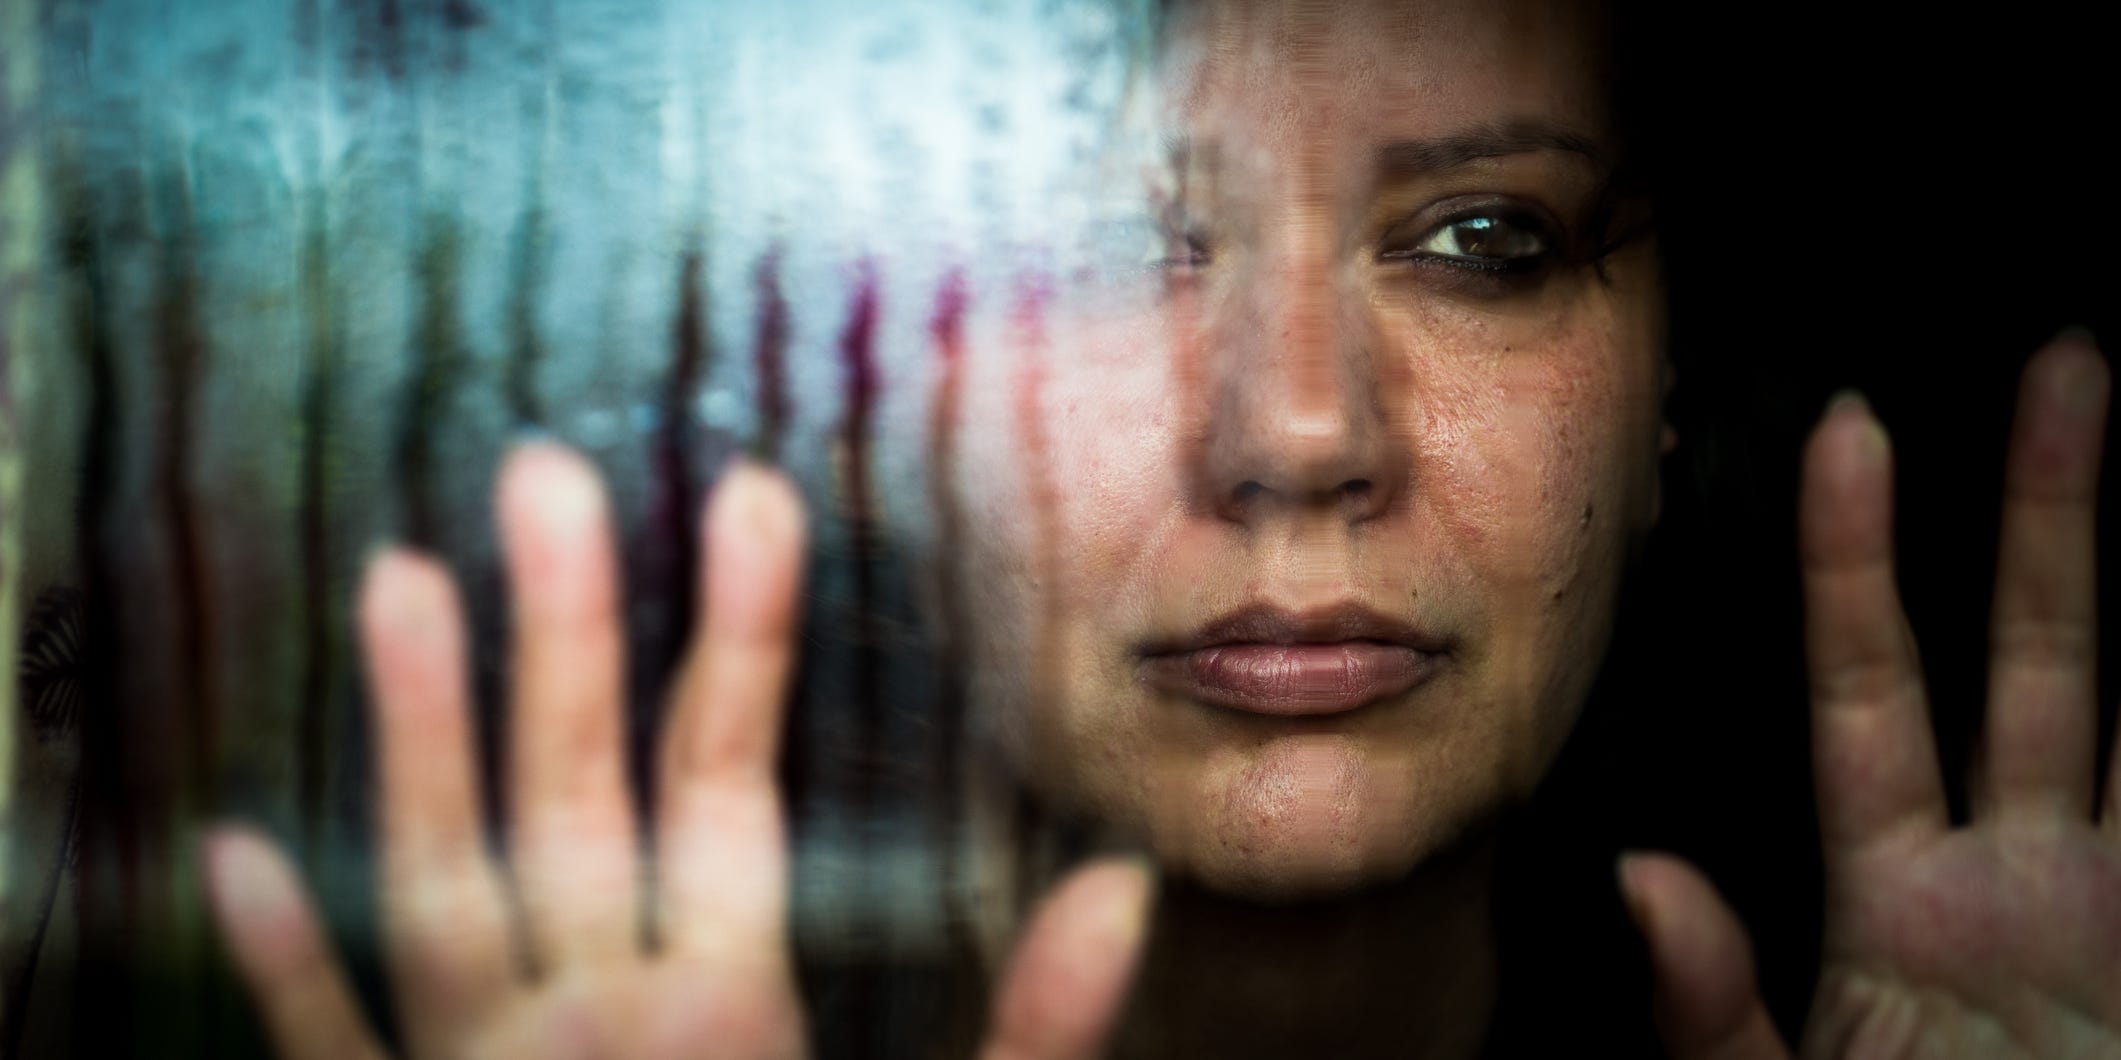 A woman stands behind a glass window avoiding the rain outside.